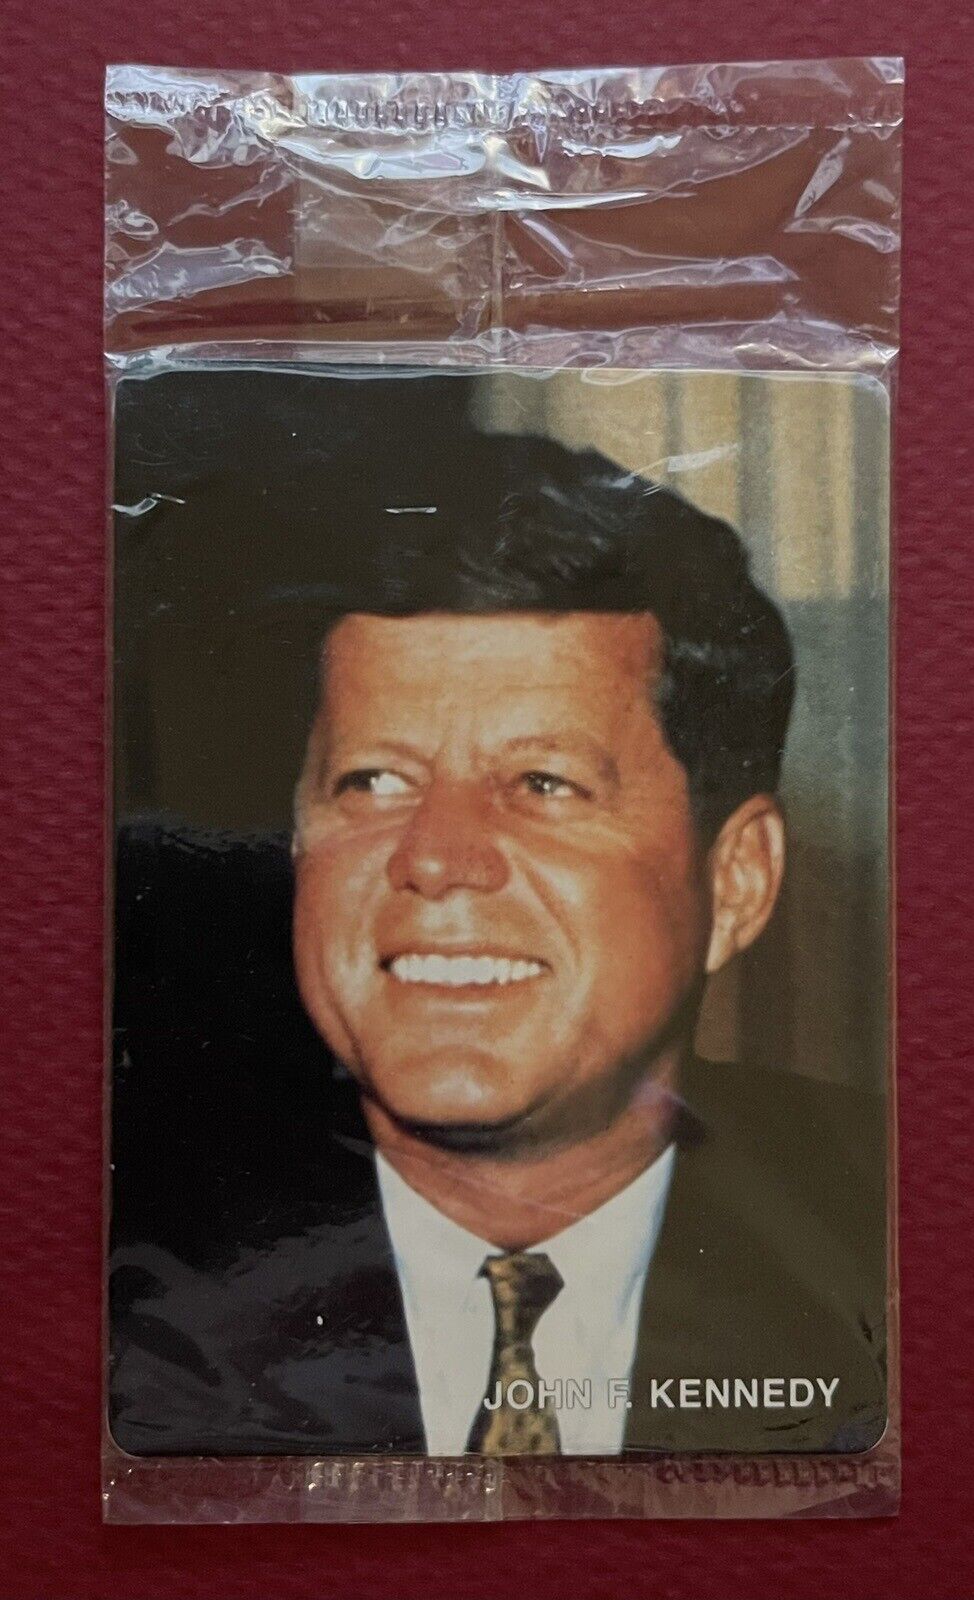 1992 JOHN F KENNEDY Mother\'s Cookies United States Presidents set #35 Sealed